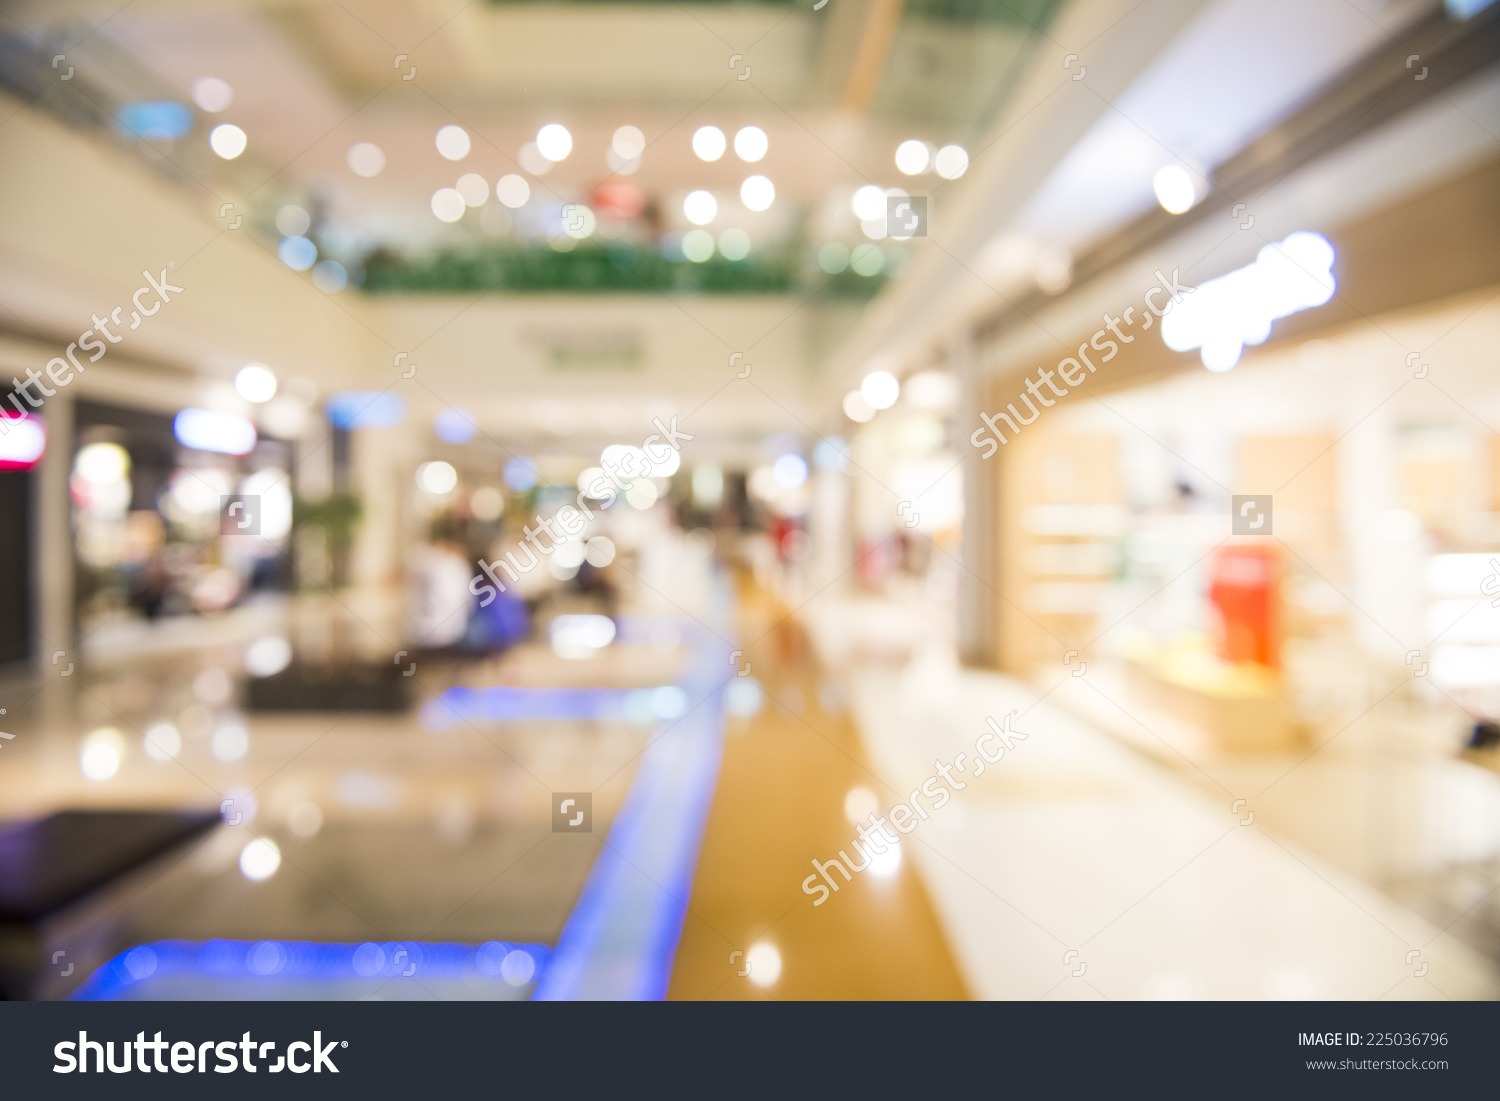 stock-photo-abstract-background-of-shopping-mall-shallow-depth-of-focus-225036796